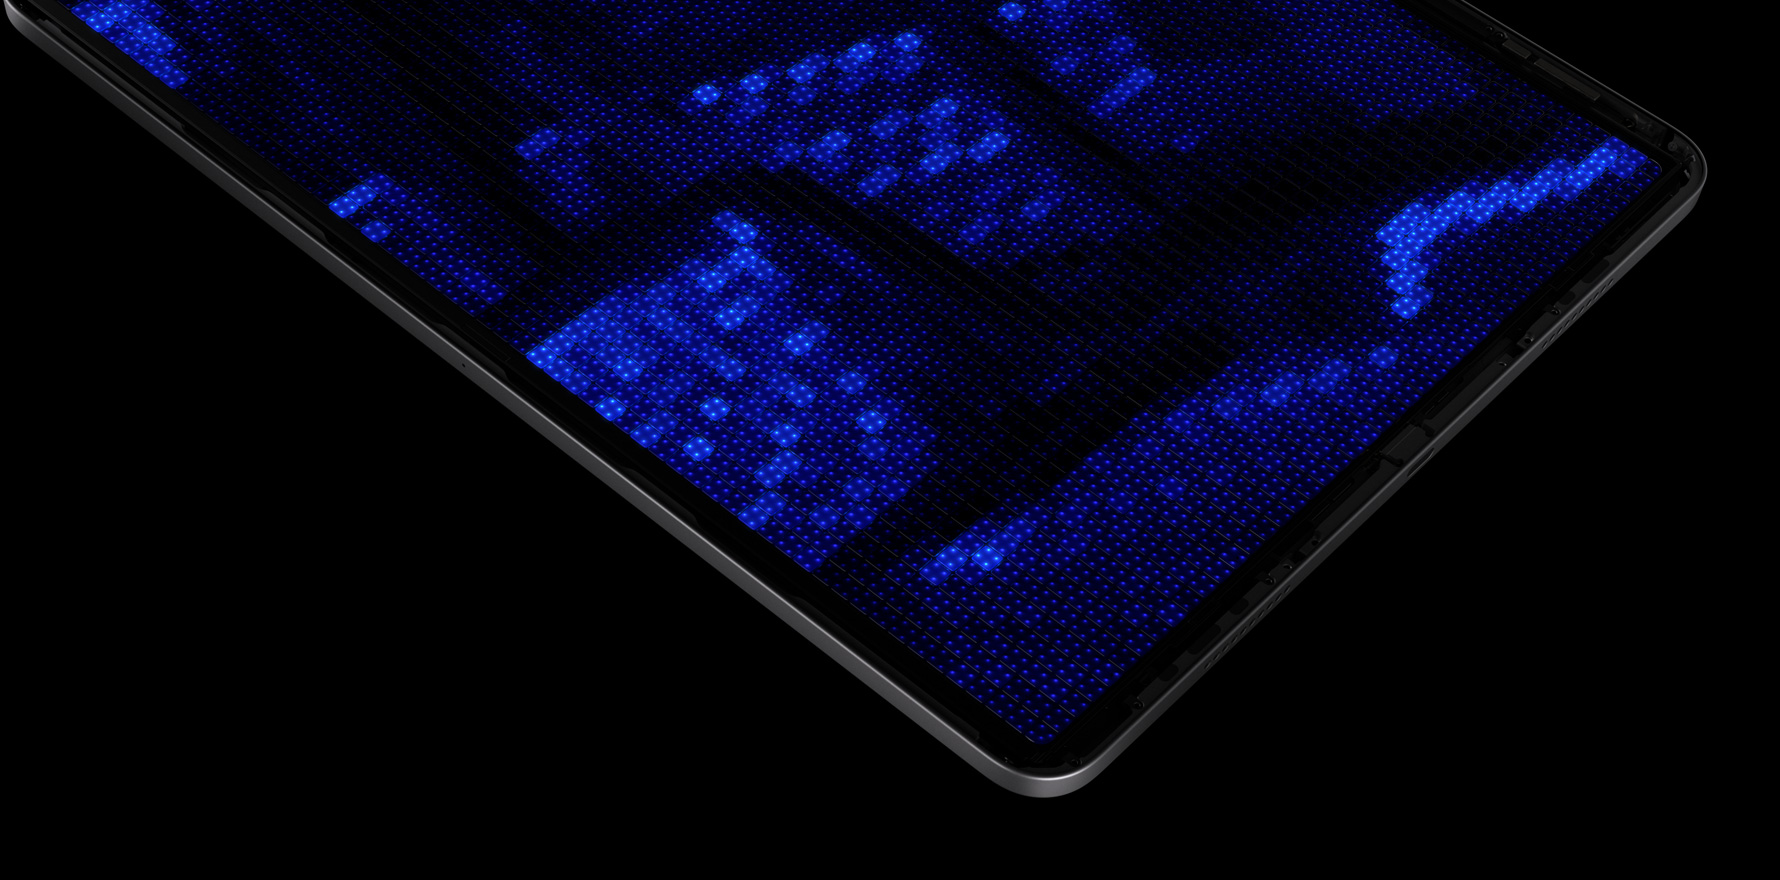 iPad Pro, in 10.5-inch and 12.9-inch models, introduces the world's most  advanced display and breakthrough performance - Apple